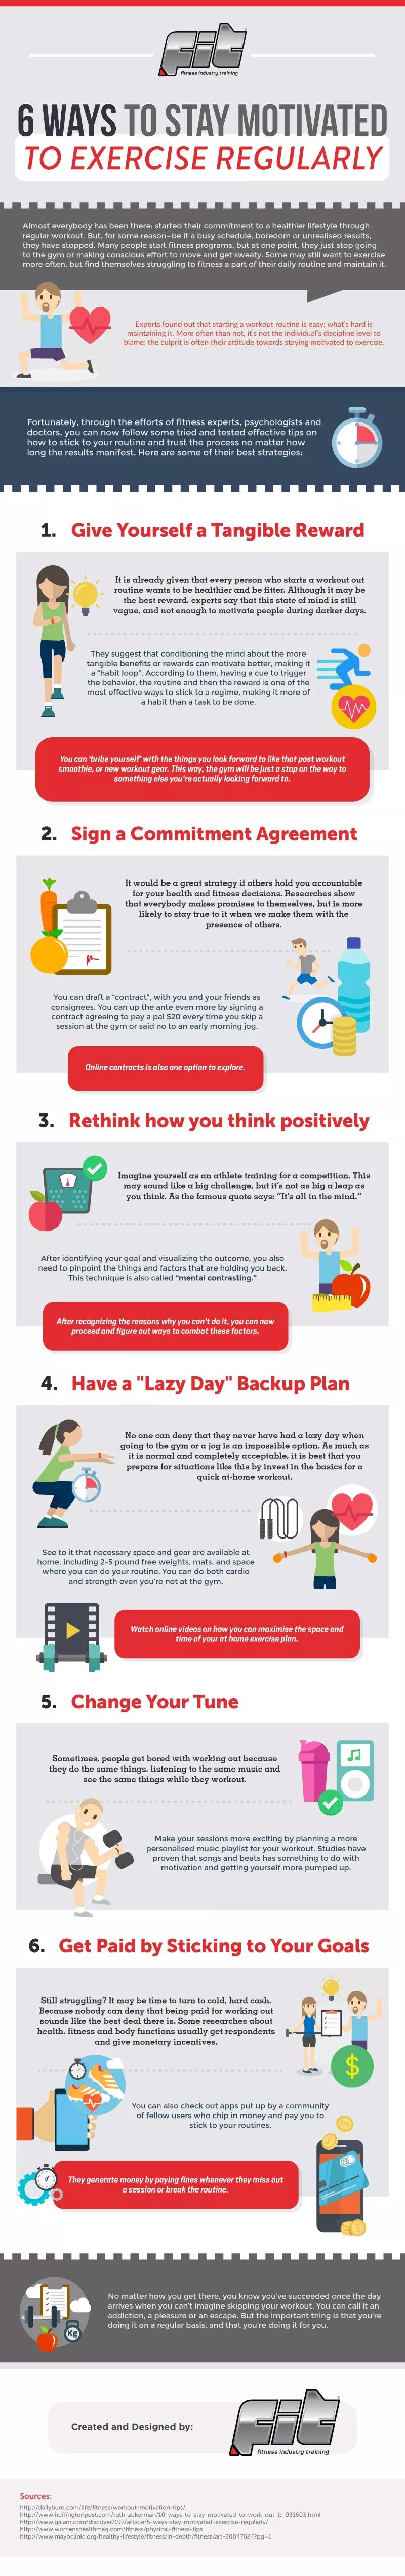 6 Ways to Stay Motivated to Exercise Regularly #infographic